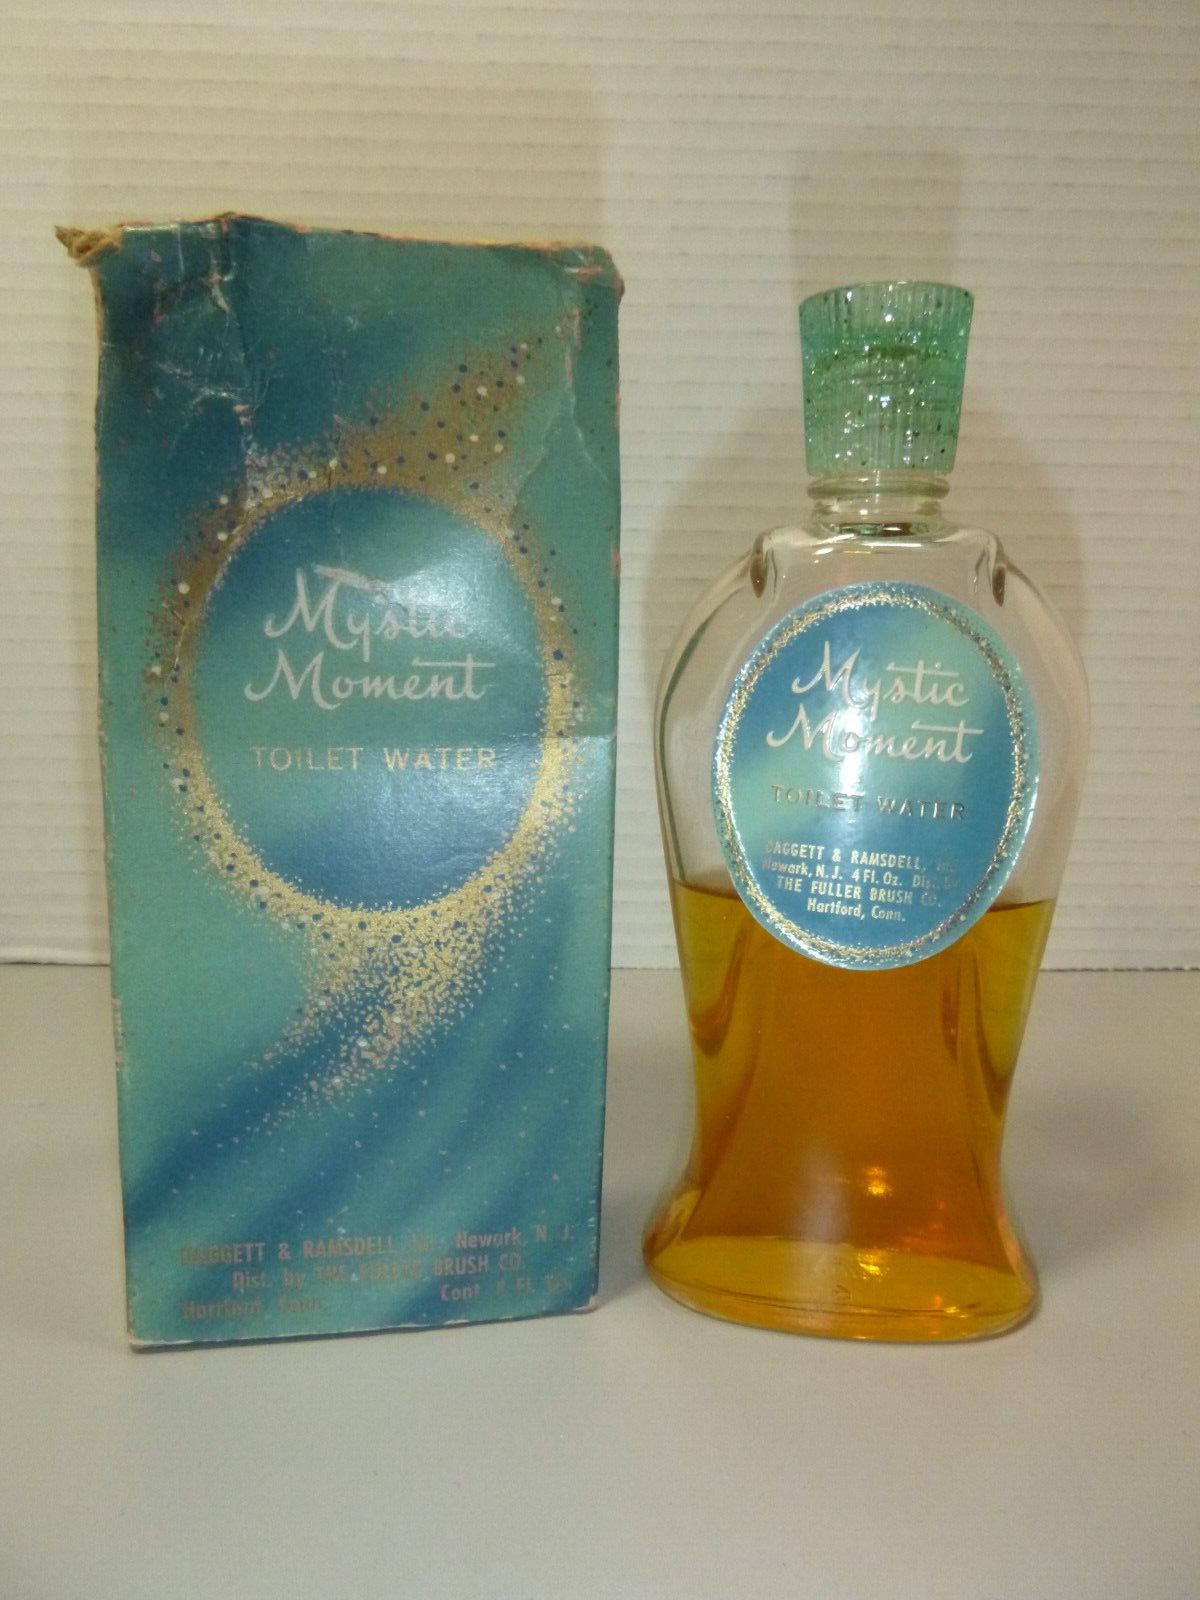 Vintage Mystic Moment Toilet Water Perfume by Daggett & Ramsdell - 1/2 Full